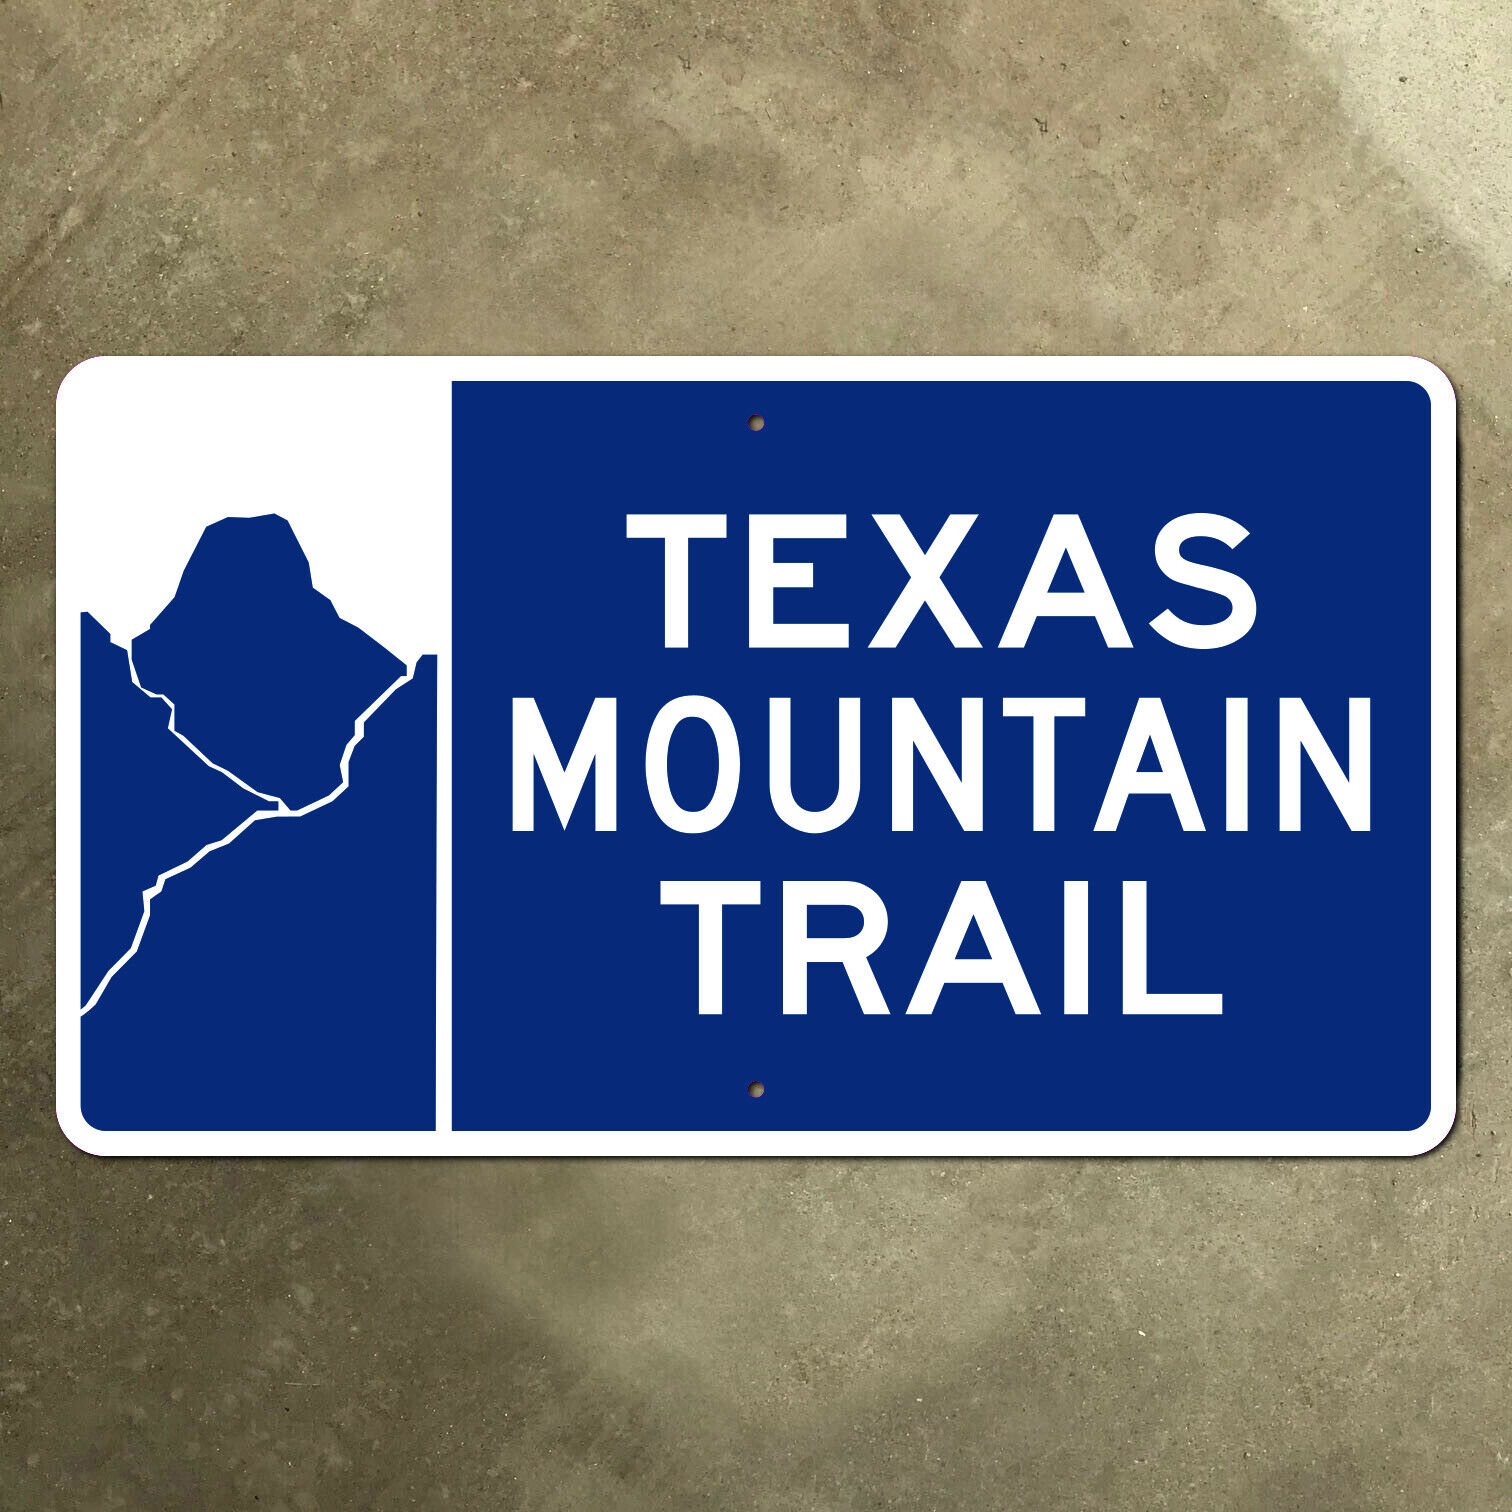 Texas Mountain Trail highway road sign scenic route Heritage 1998 21x12